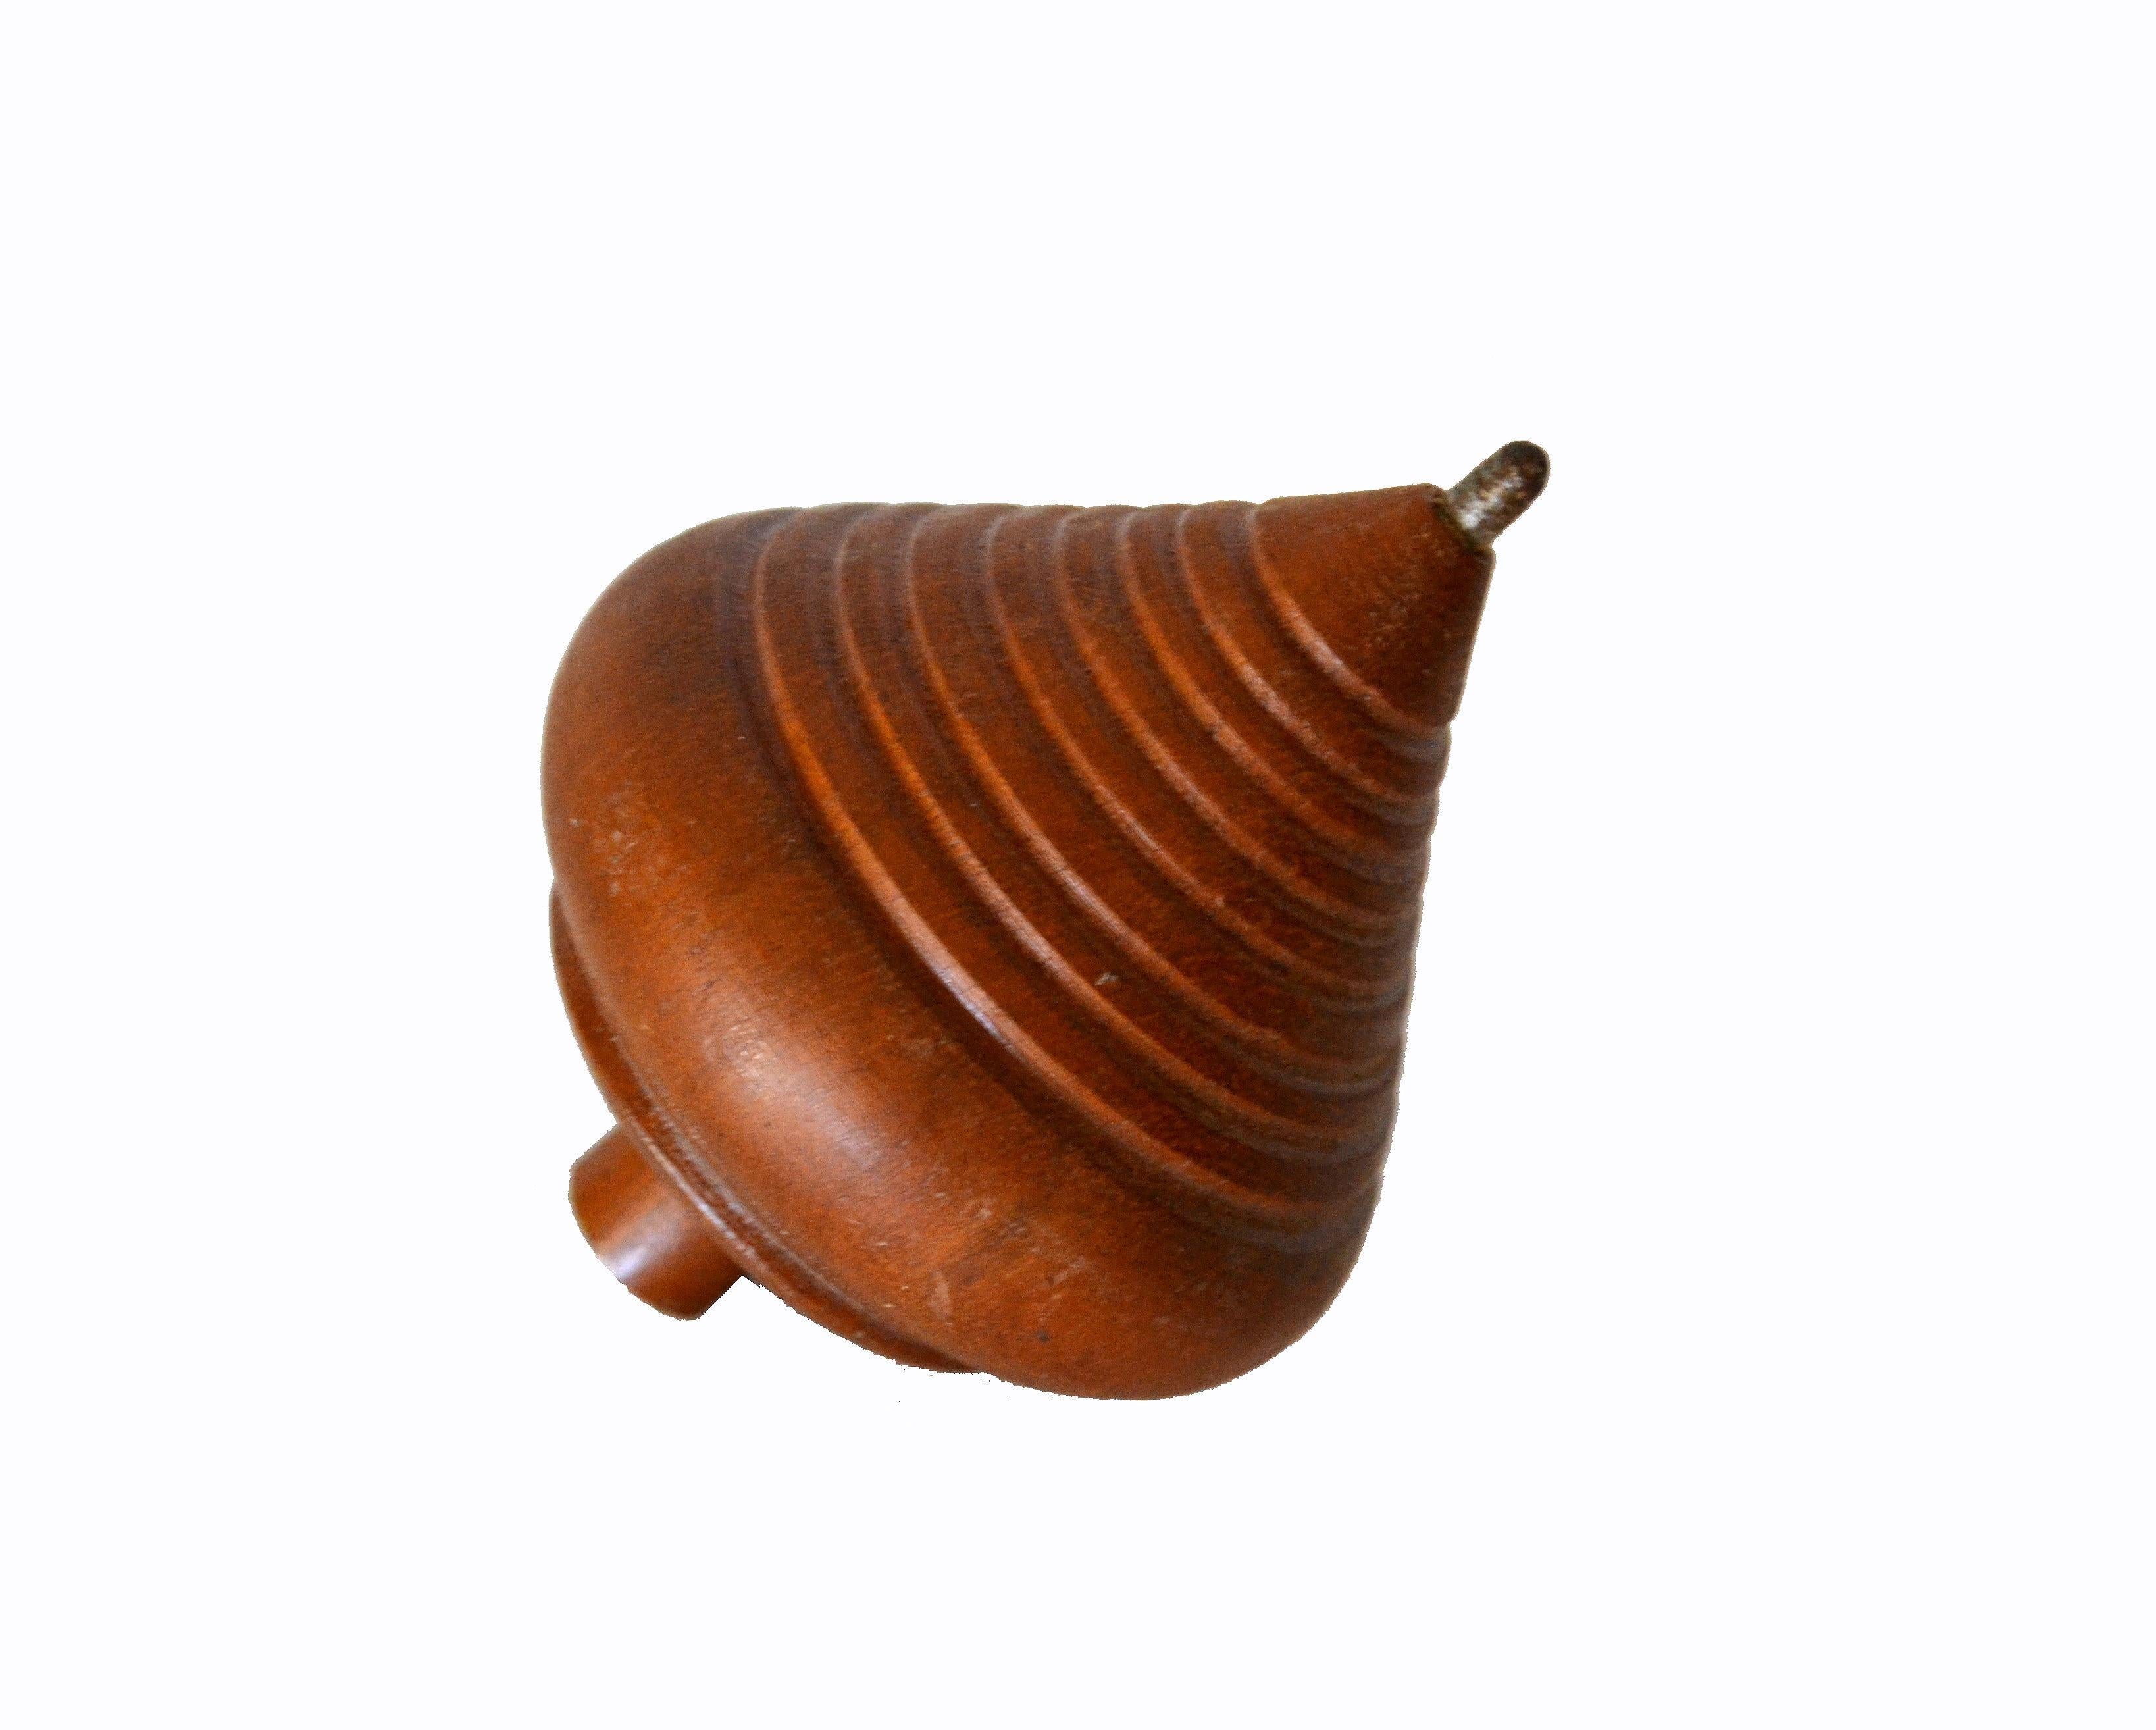 20th Century American Mid-Century Modern Woodworking Turned Walnut Wood Spinning Top Toy For Sale